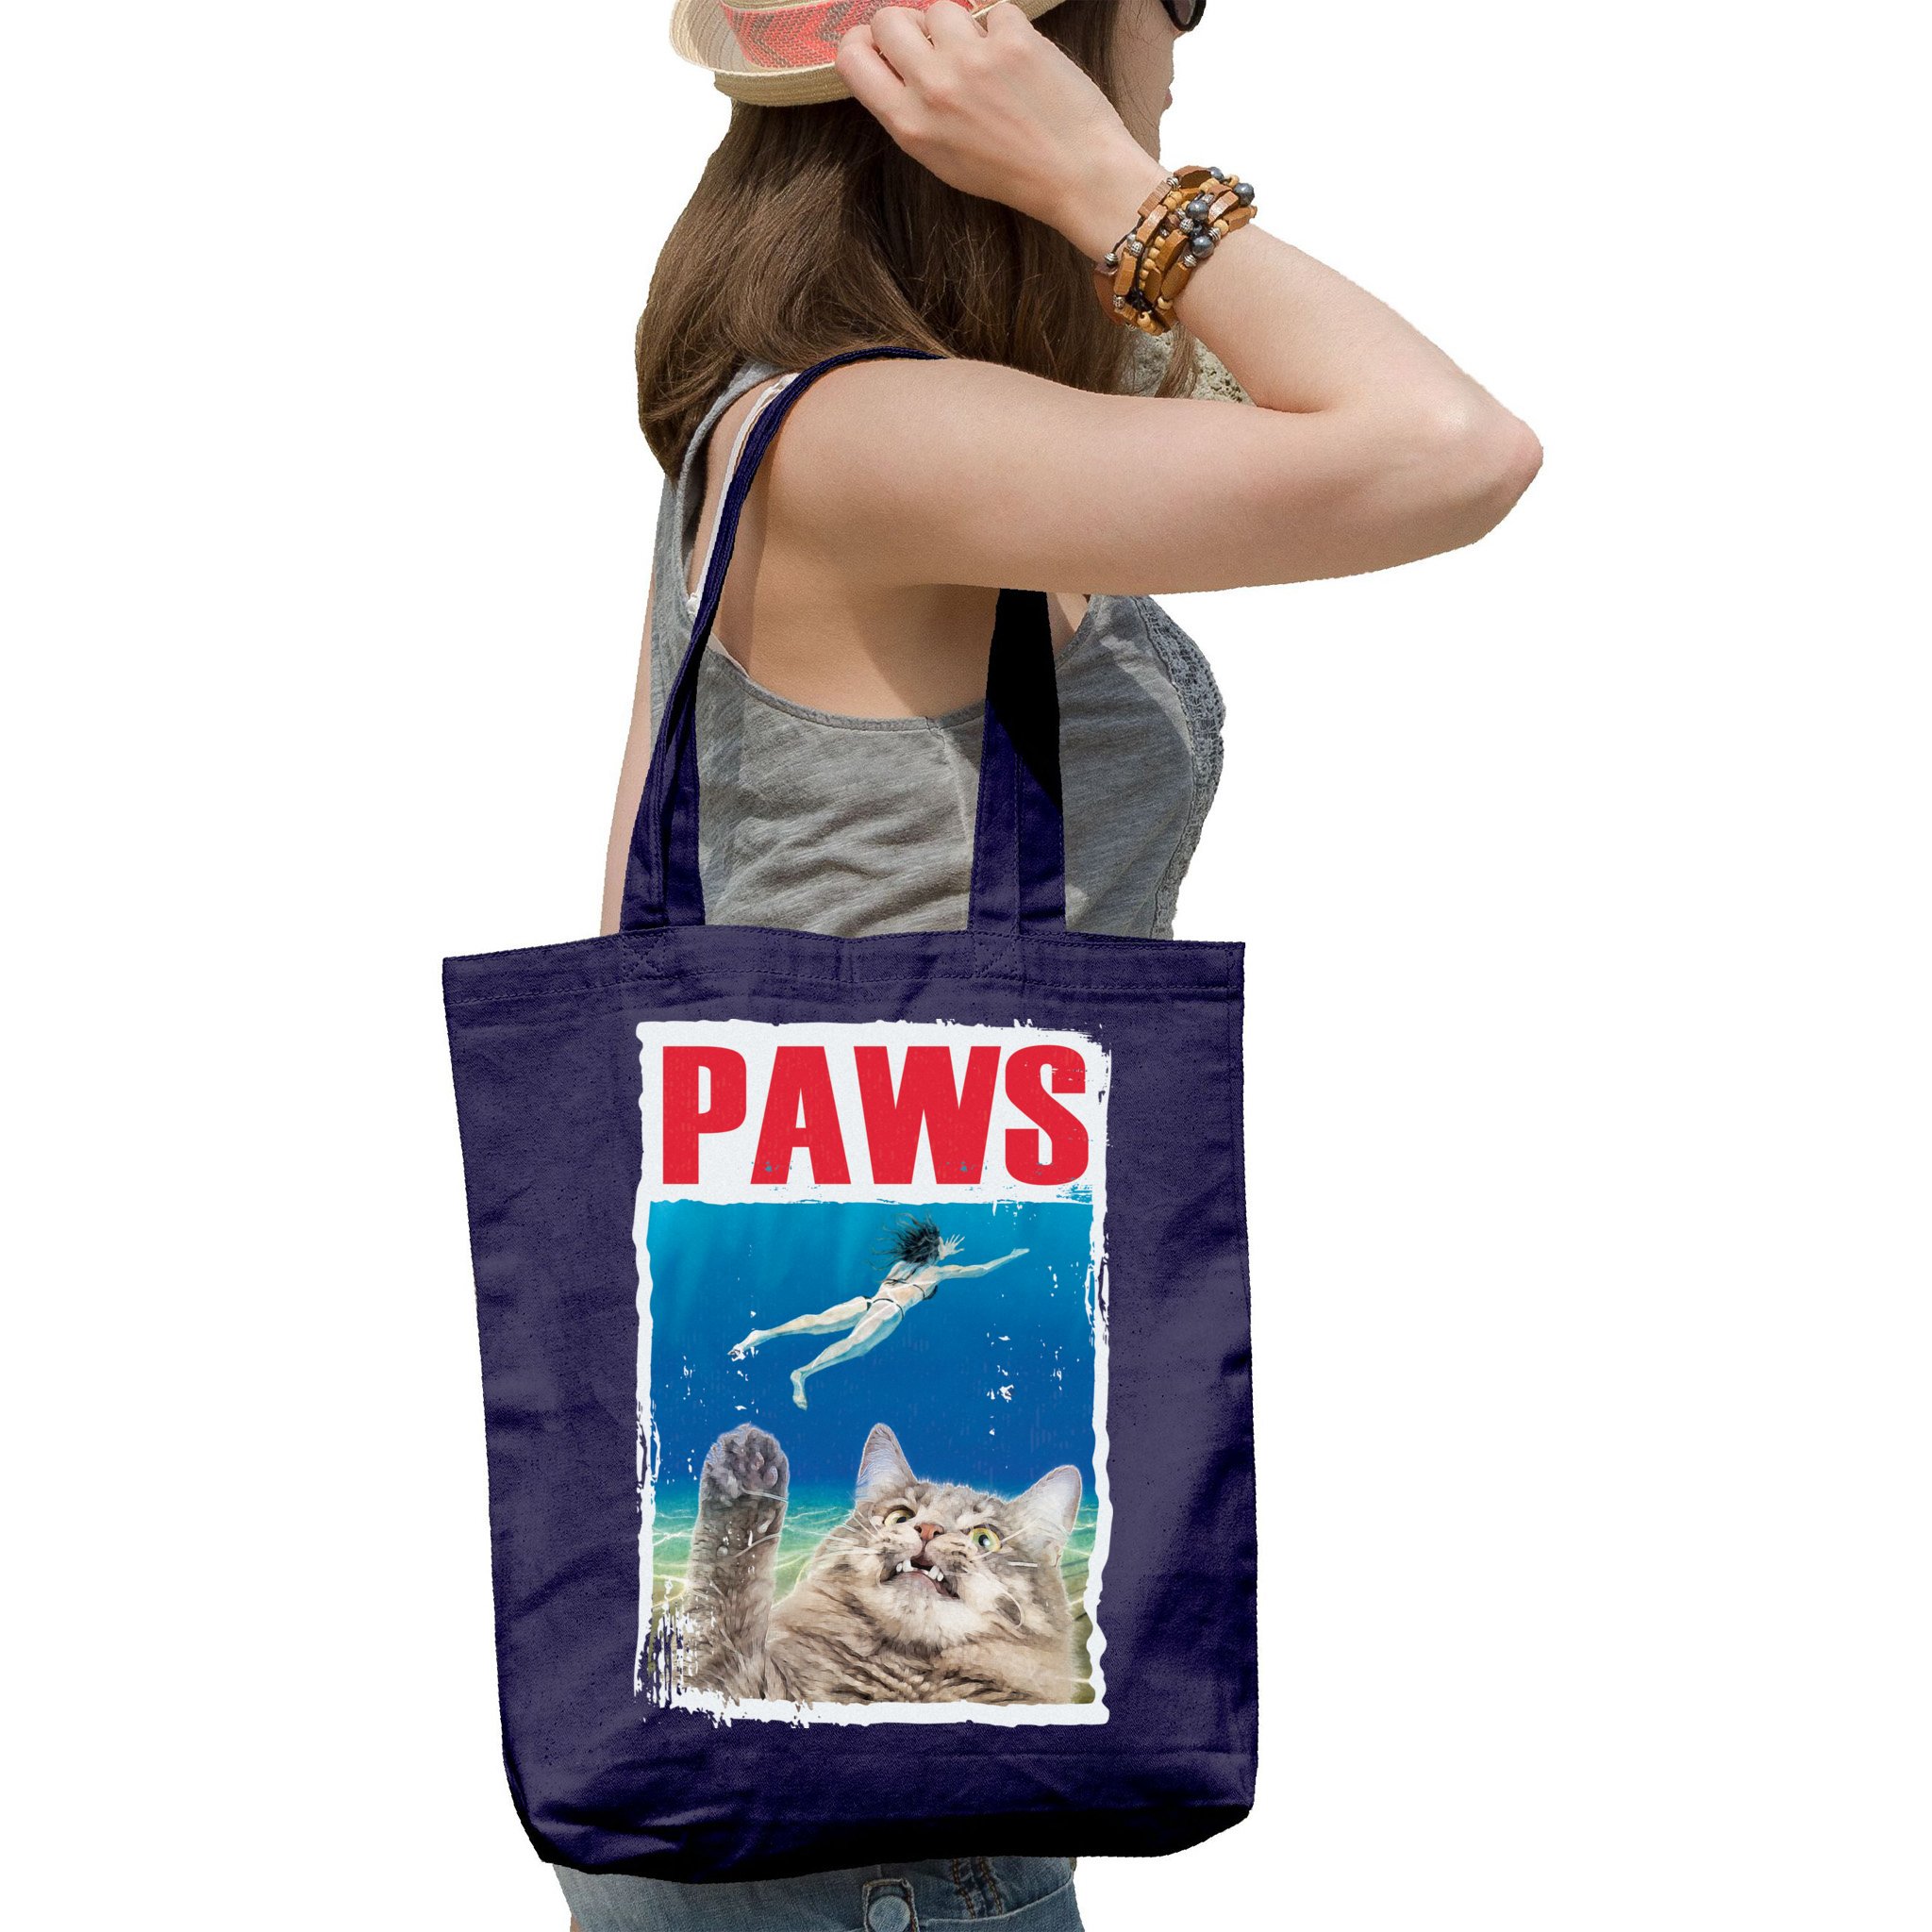 FUNNY PAWS CAT MOVIE POSTER COOL SHOPPING CANVAS TOTE BAG IDEAL GIFT PRESENT 